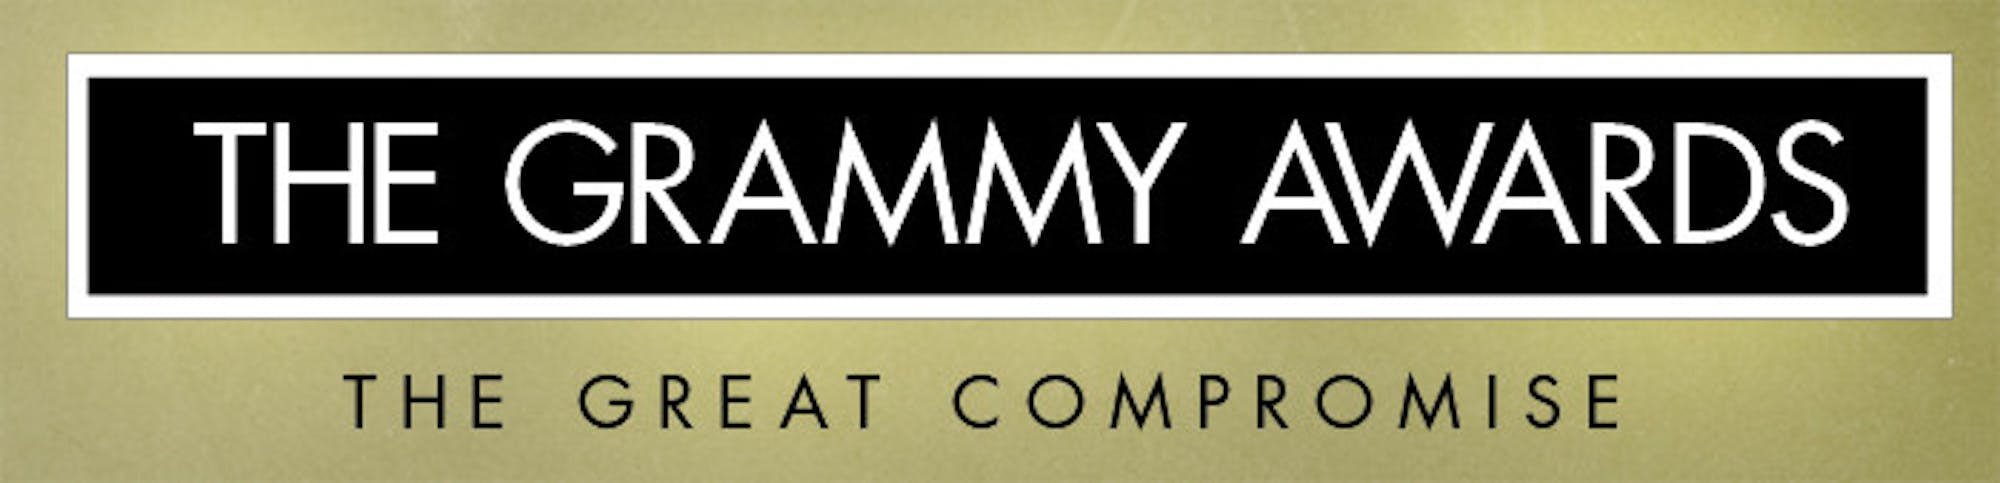 Grammys_Compromise_WEB